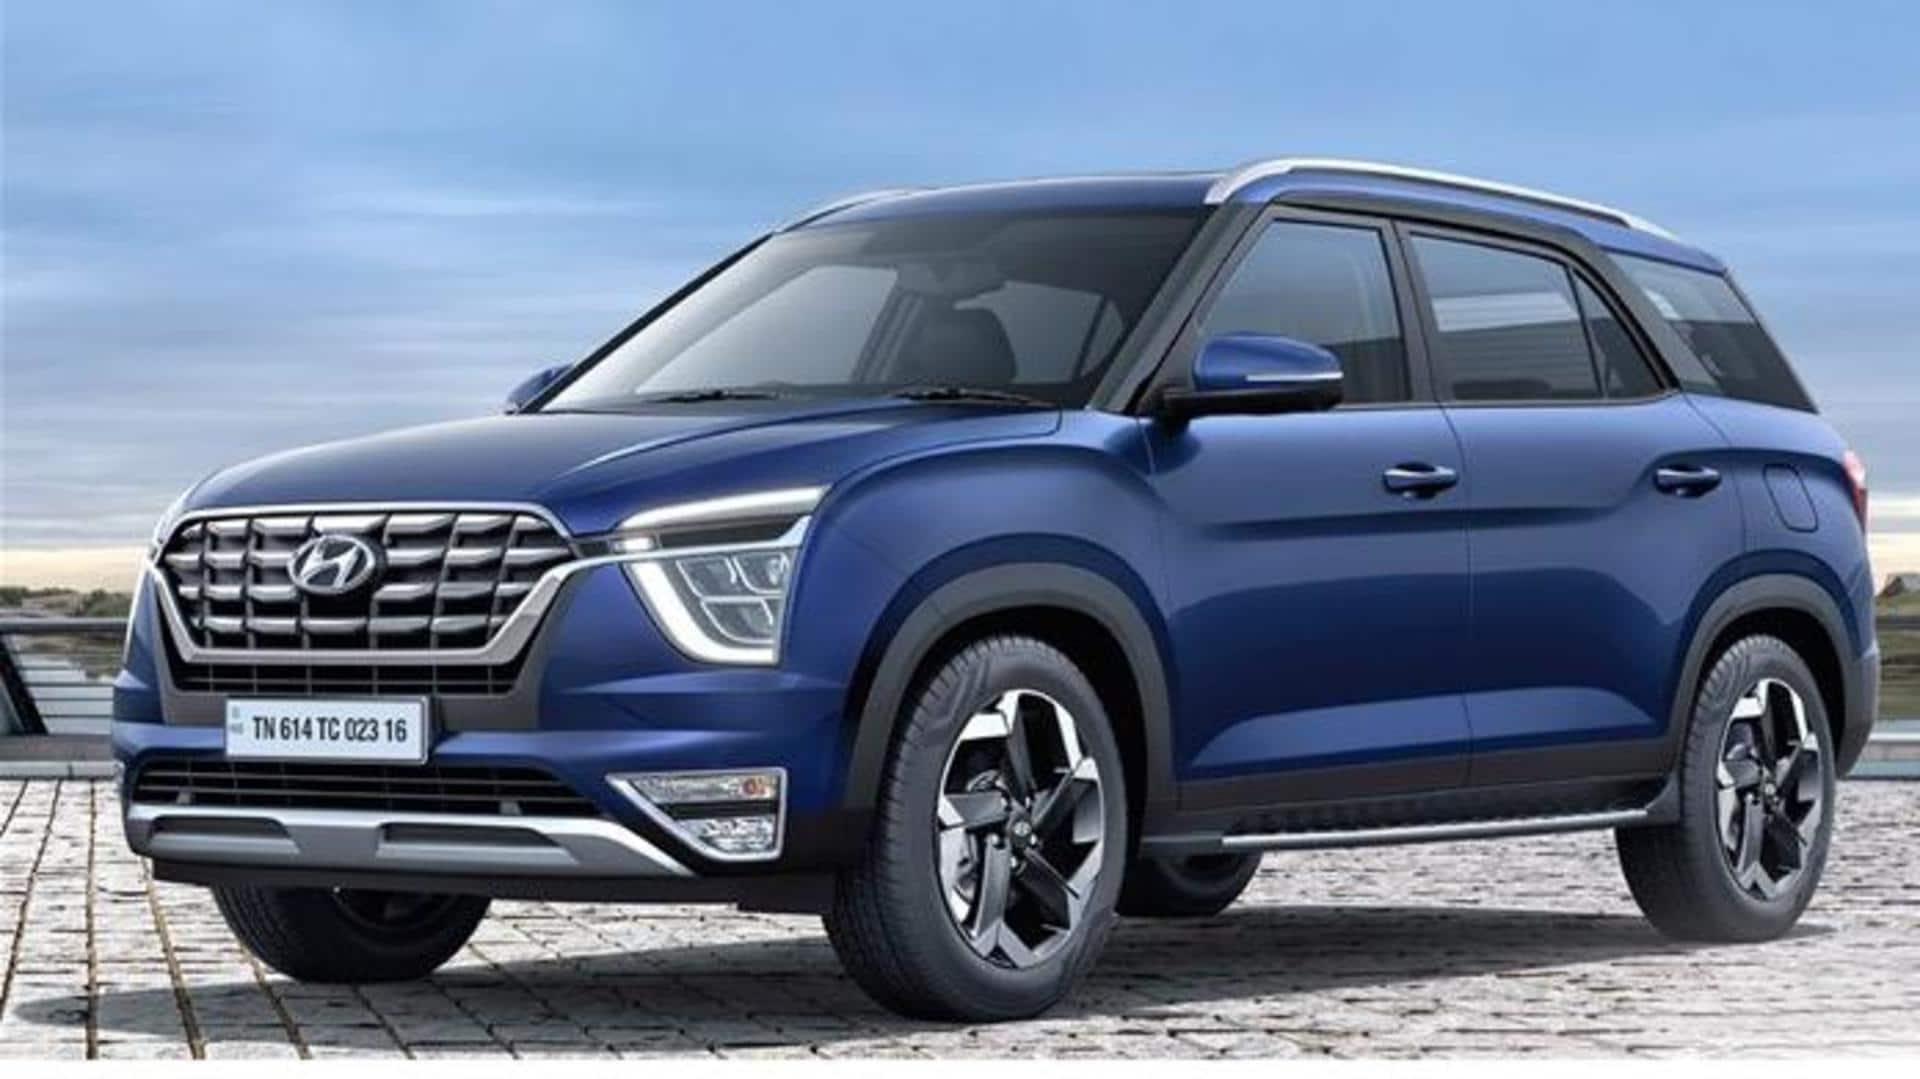 2023 Hyundai ALCAZAR's bookings open in India: Should you reserve